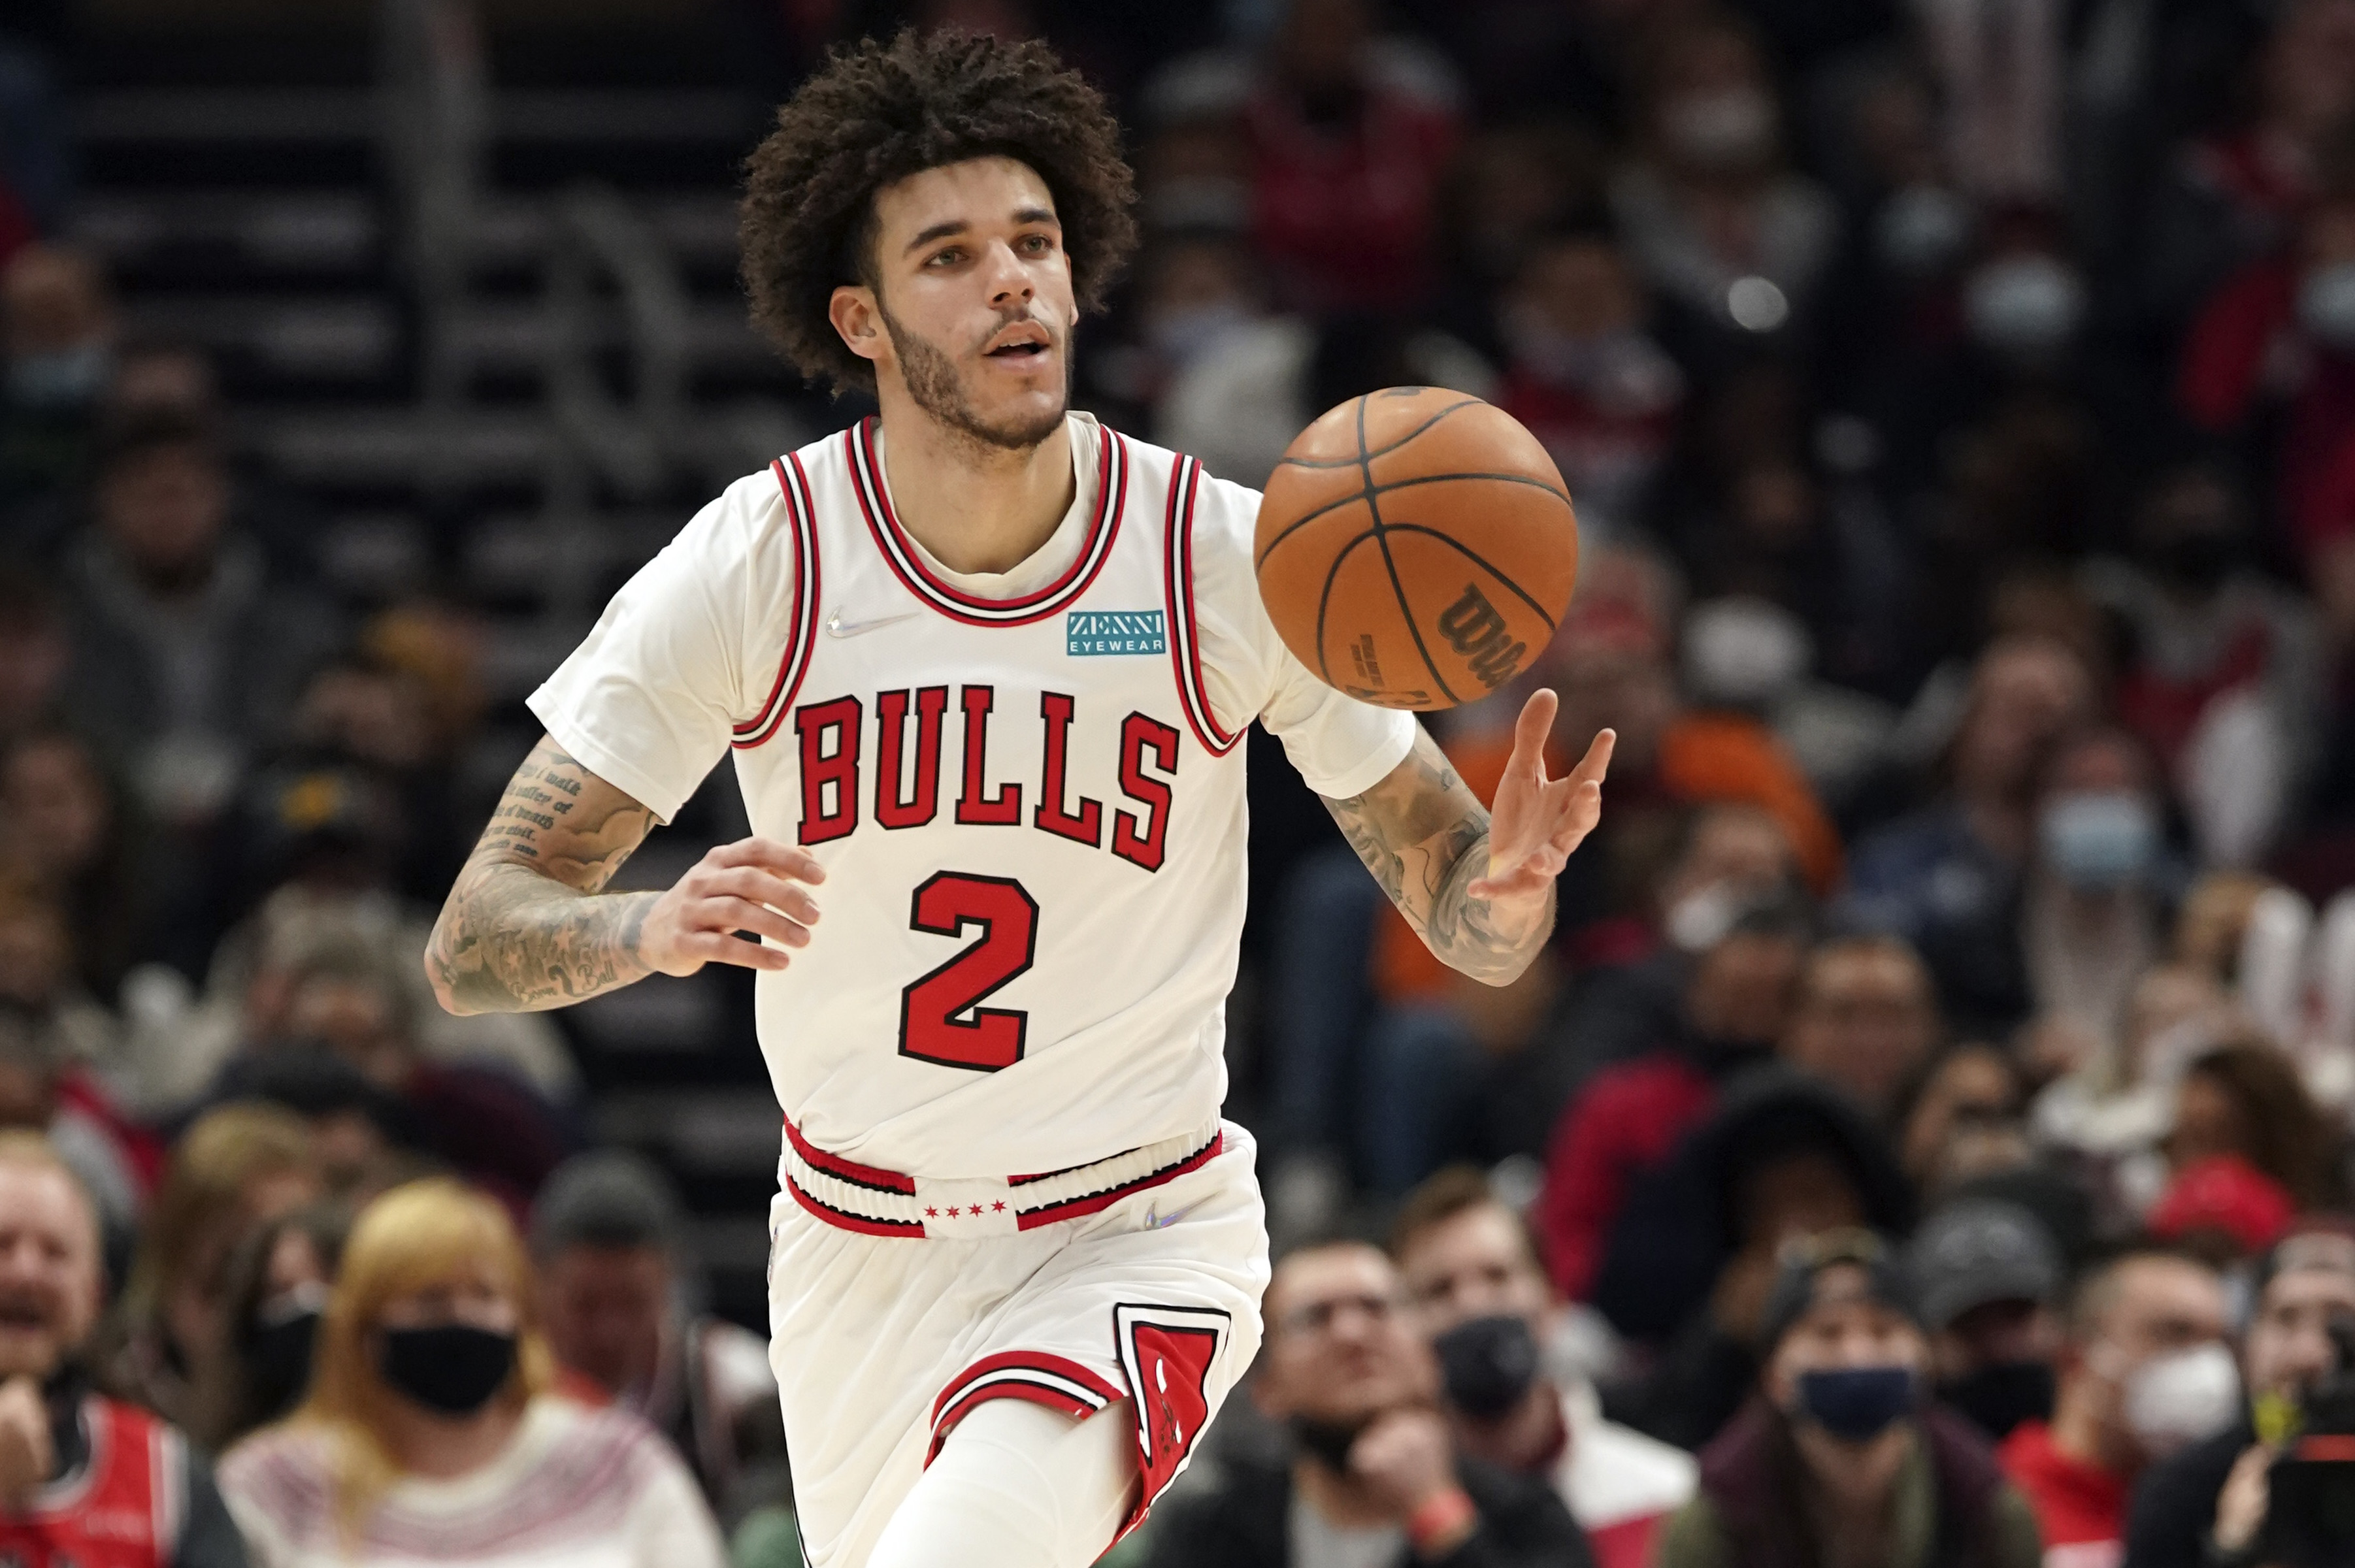 Bulls' Lonzo ball was removed from Celtics Game due to a knee injury thumbnail